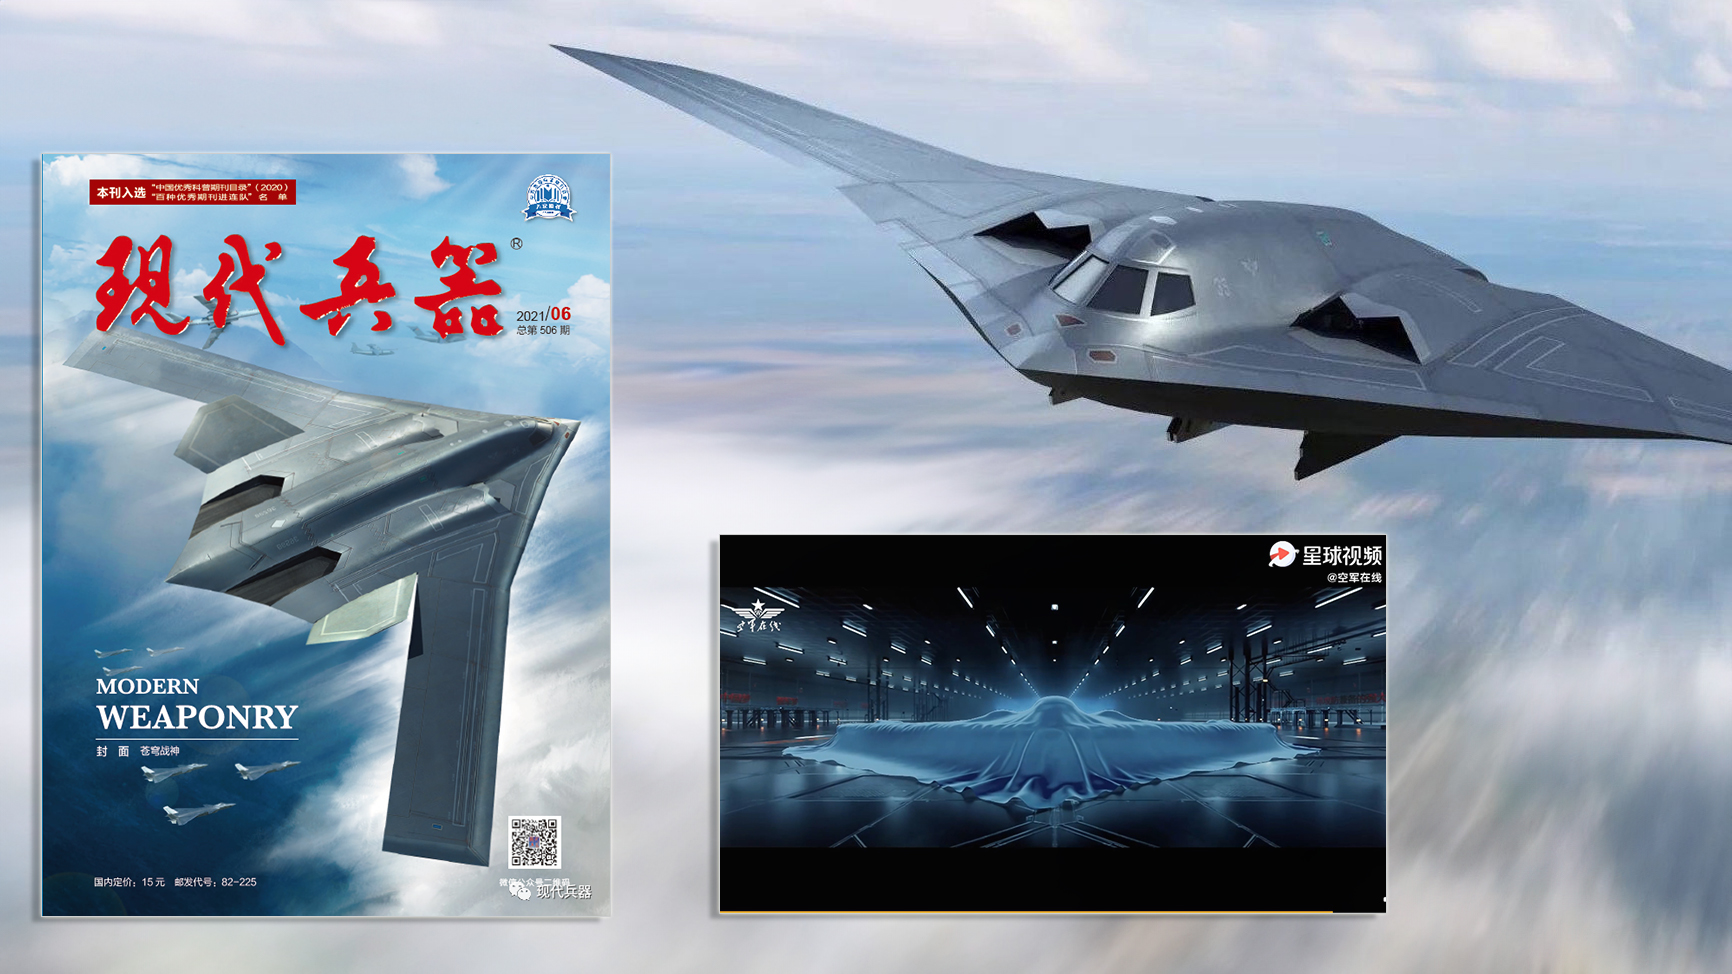 US Official Doubts China’s Stealth Bomber Can Rival American Designs